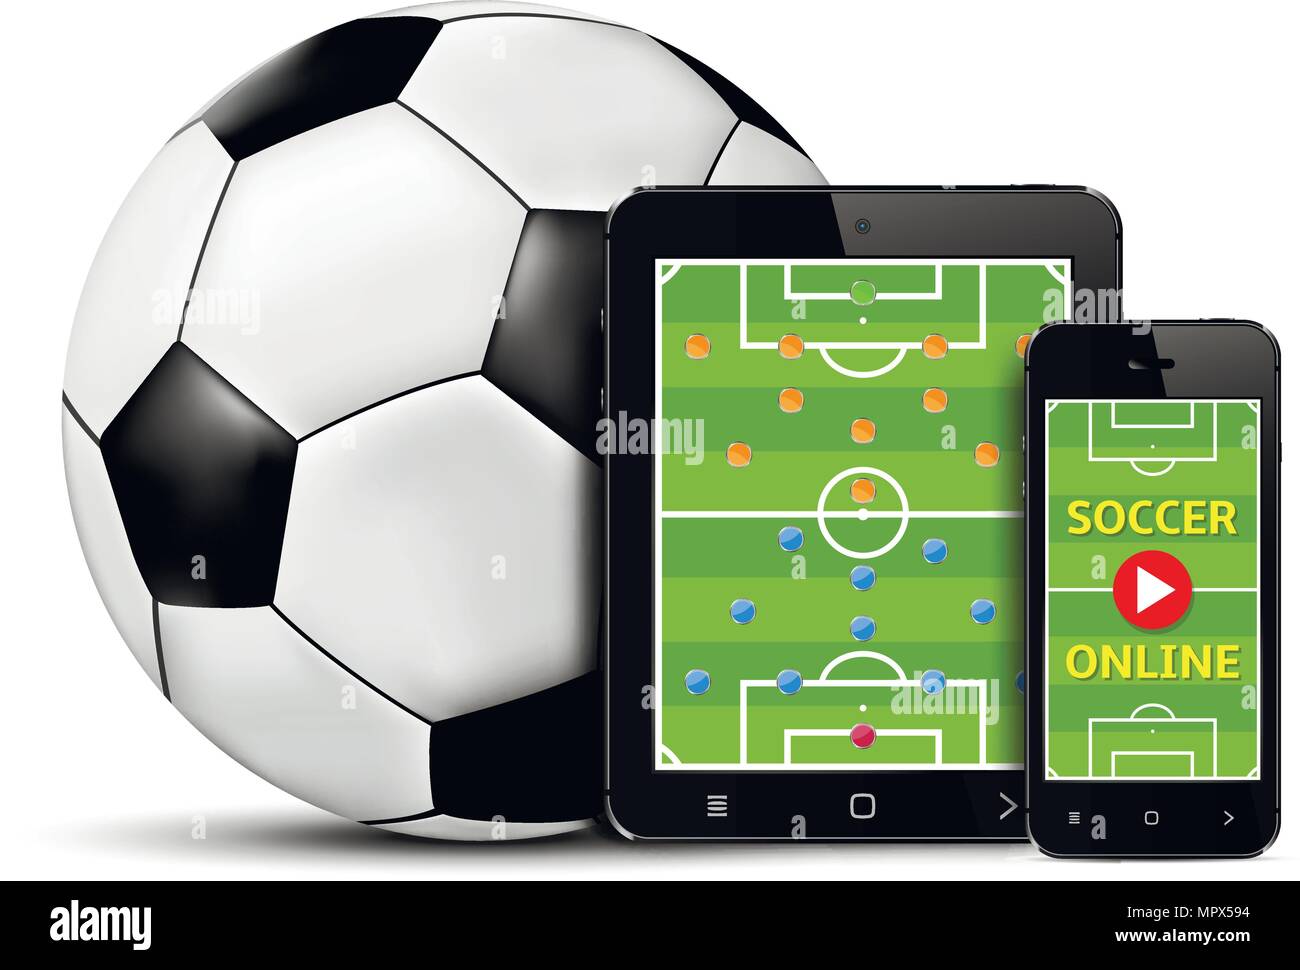 Live football and soccer online on mobile phone and tablet with tactical scheme on screen